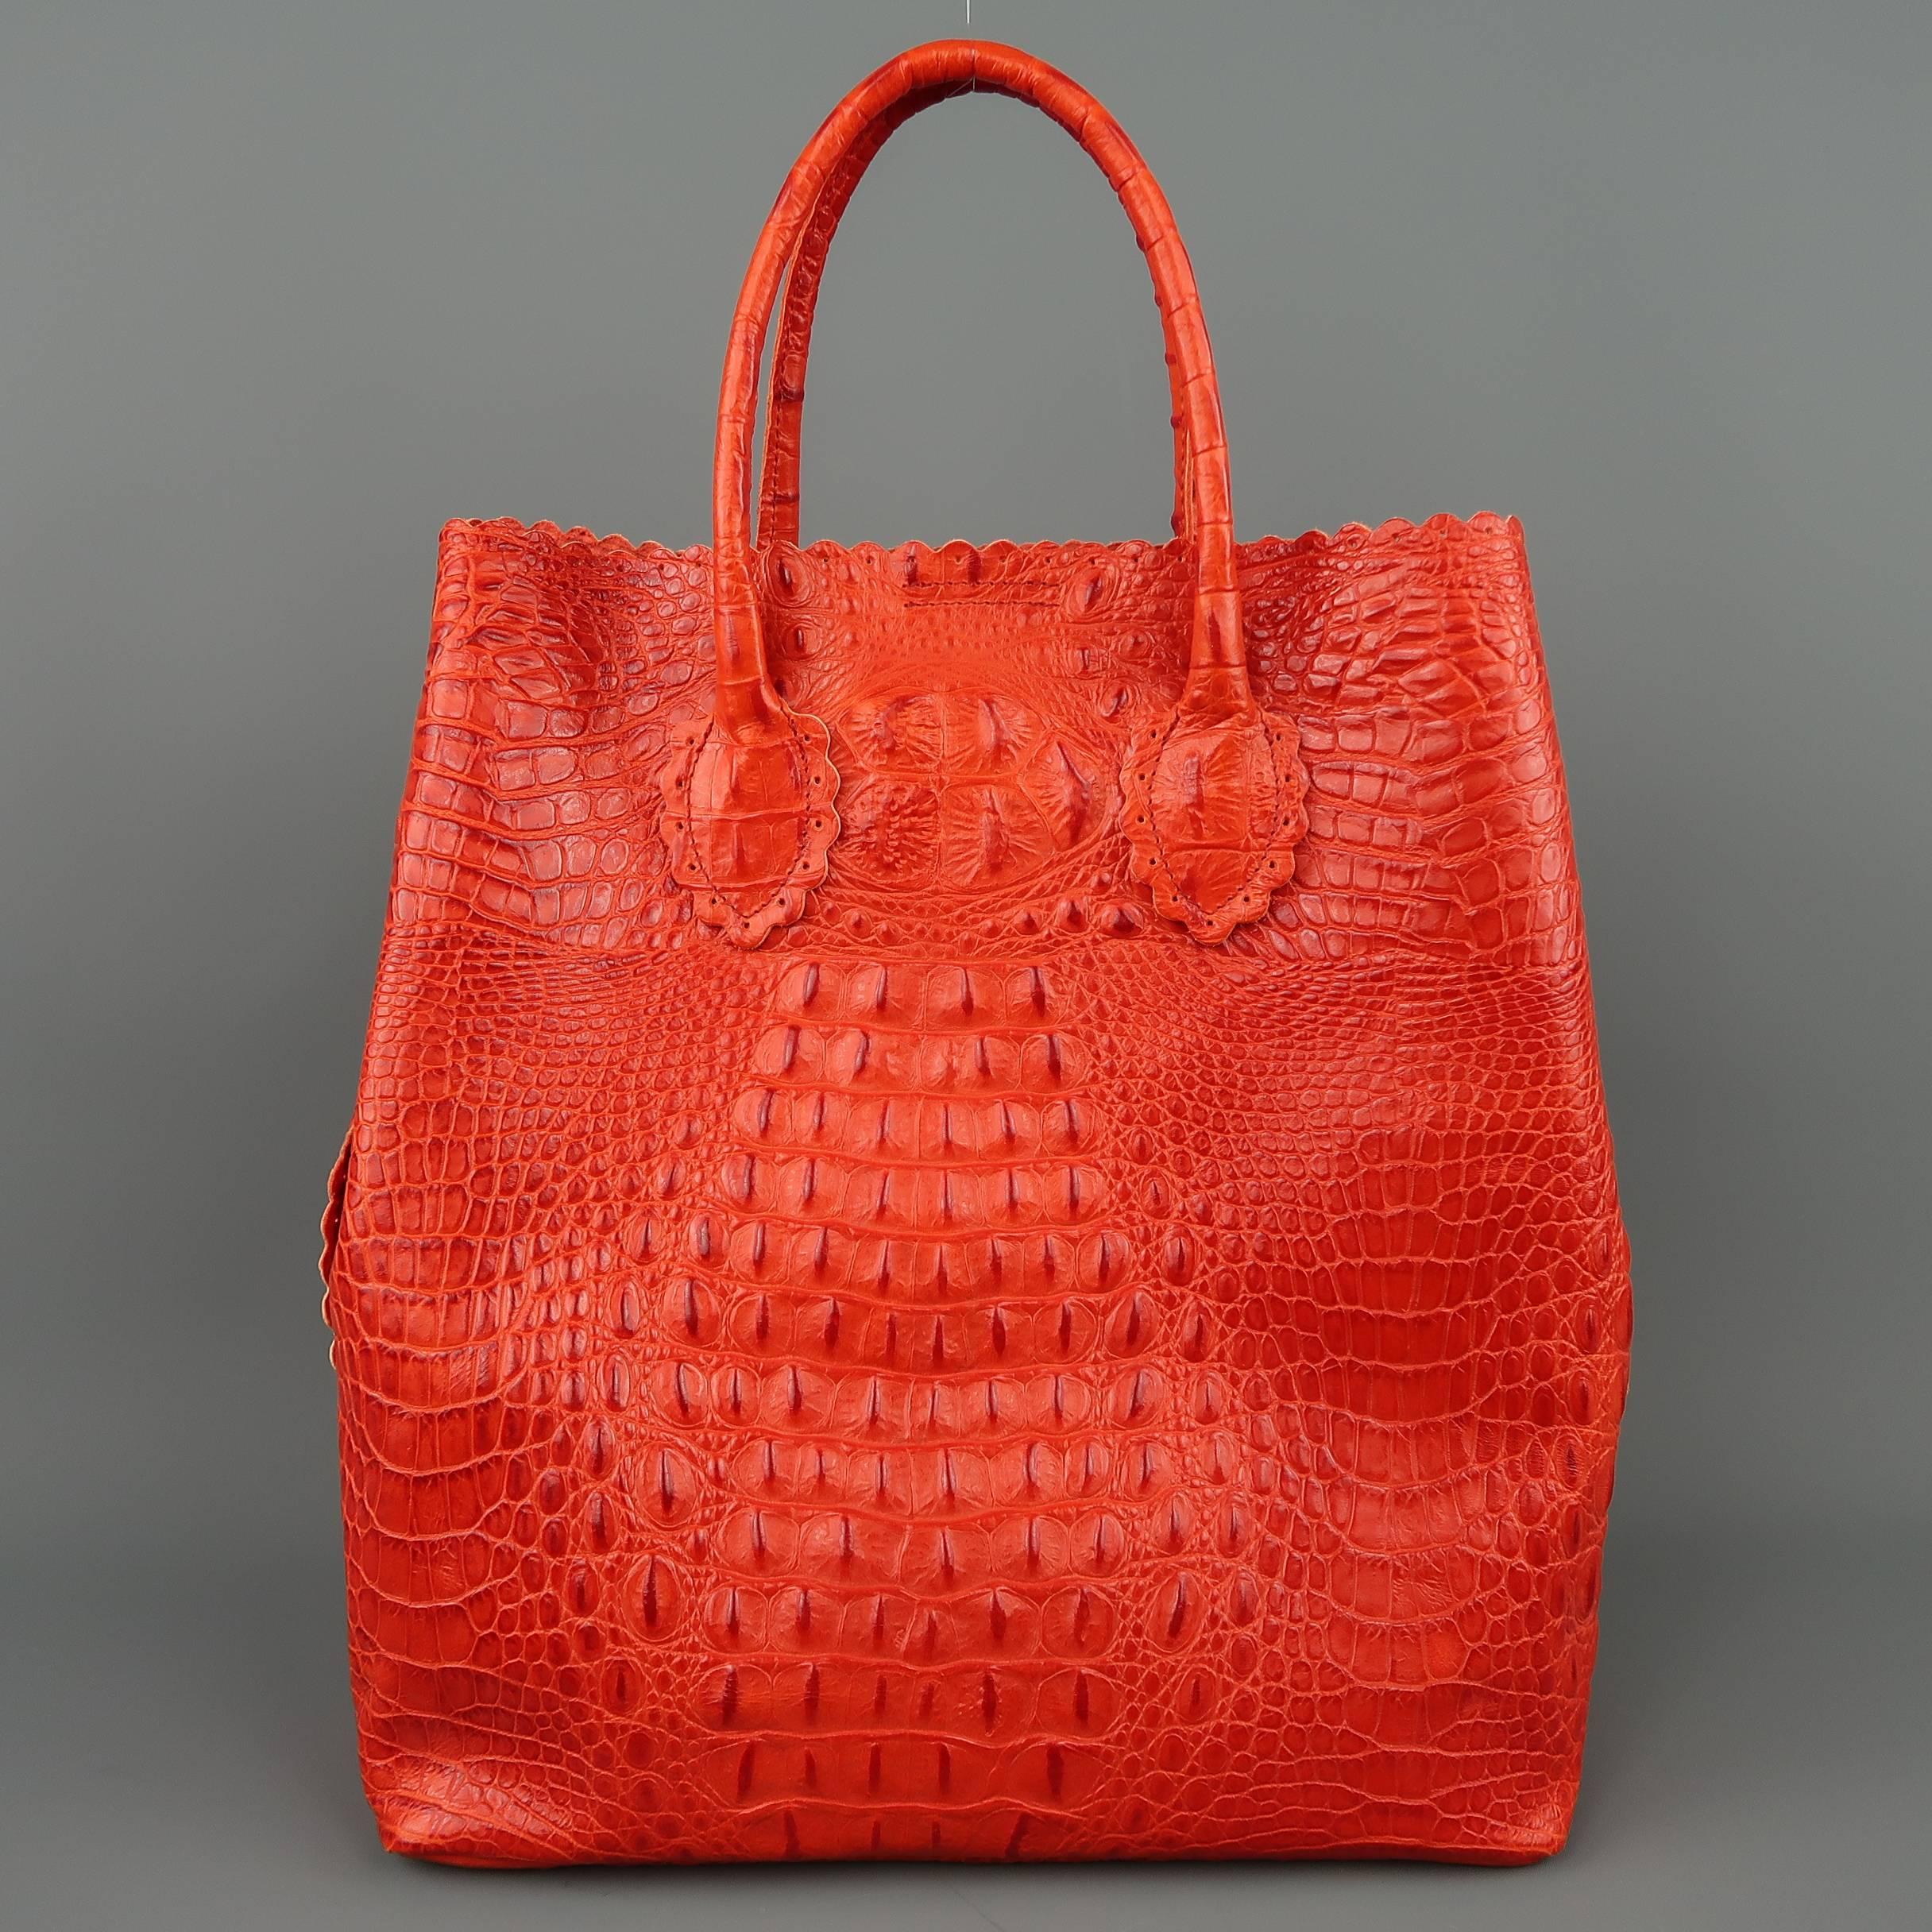 FULA tote bag comes in a vibrant orange crocodile embossed leather with scalloped  trim, snap sides, double covered top handles, logo tab, and detachable vinyl inner pouch. With dust bag.
 
Excellent Pre-Owned Condition.
 
Measurements:
 
Length: